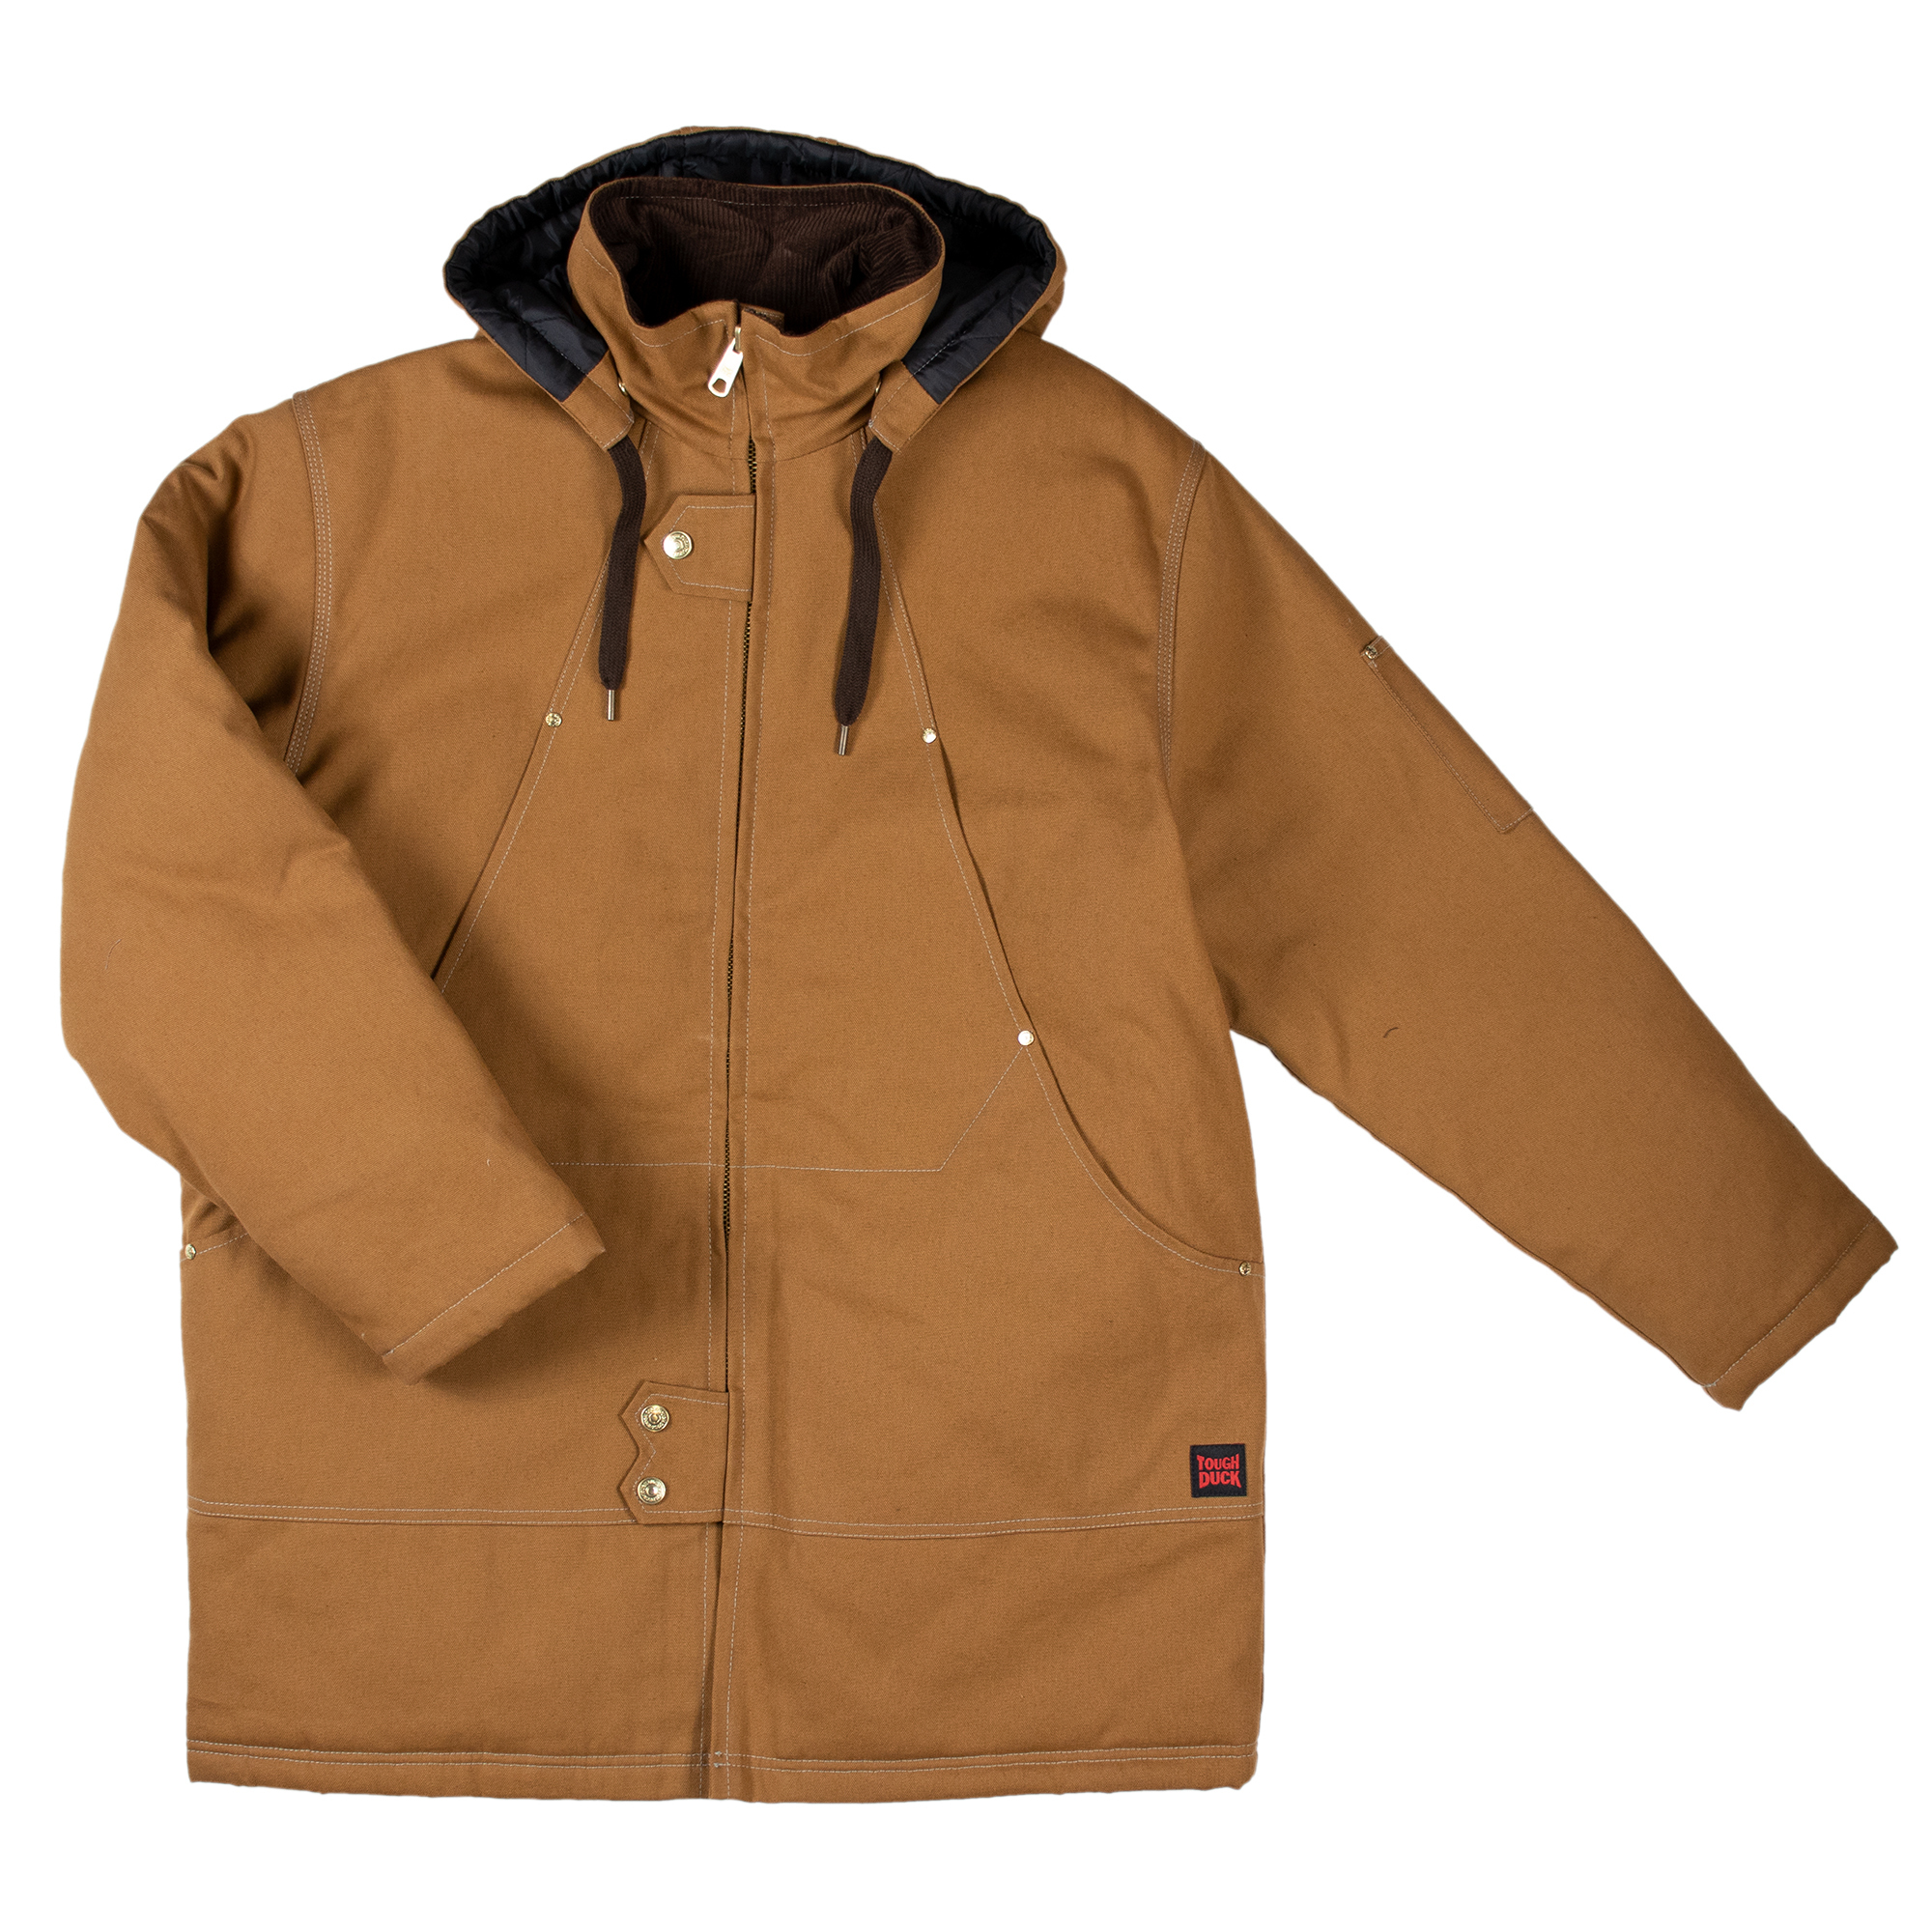 Tough Duck, Abraham Hydro Parka, Size 4XL, Color BROWN, Model# WJ182-BROWN- | Northern Tool